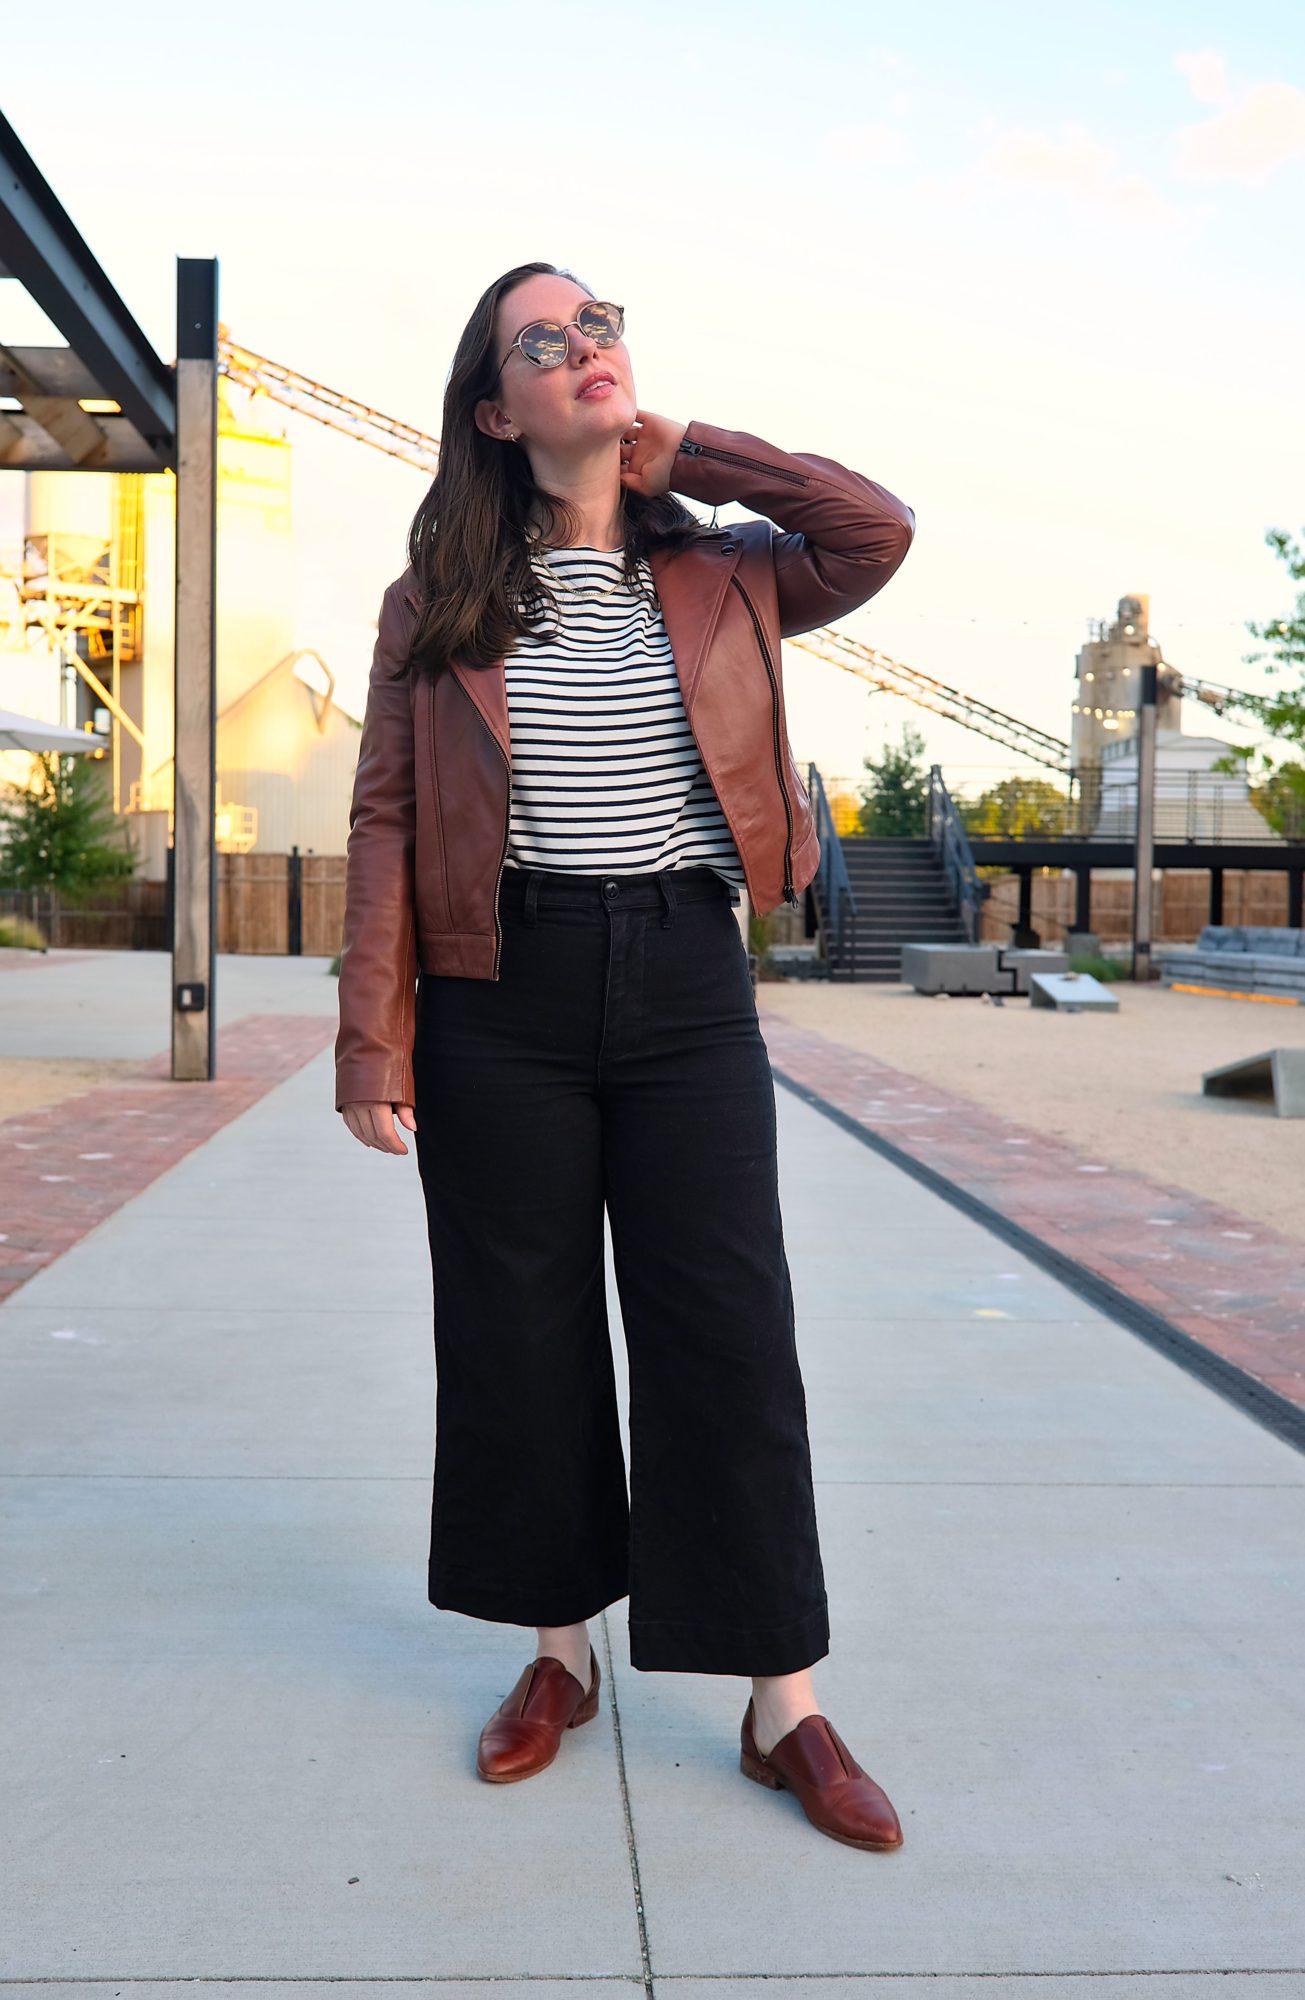 Alyssa wears the Maha Leather Jacket from ABLE with a striped tee and wide-leg pants